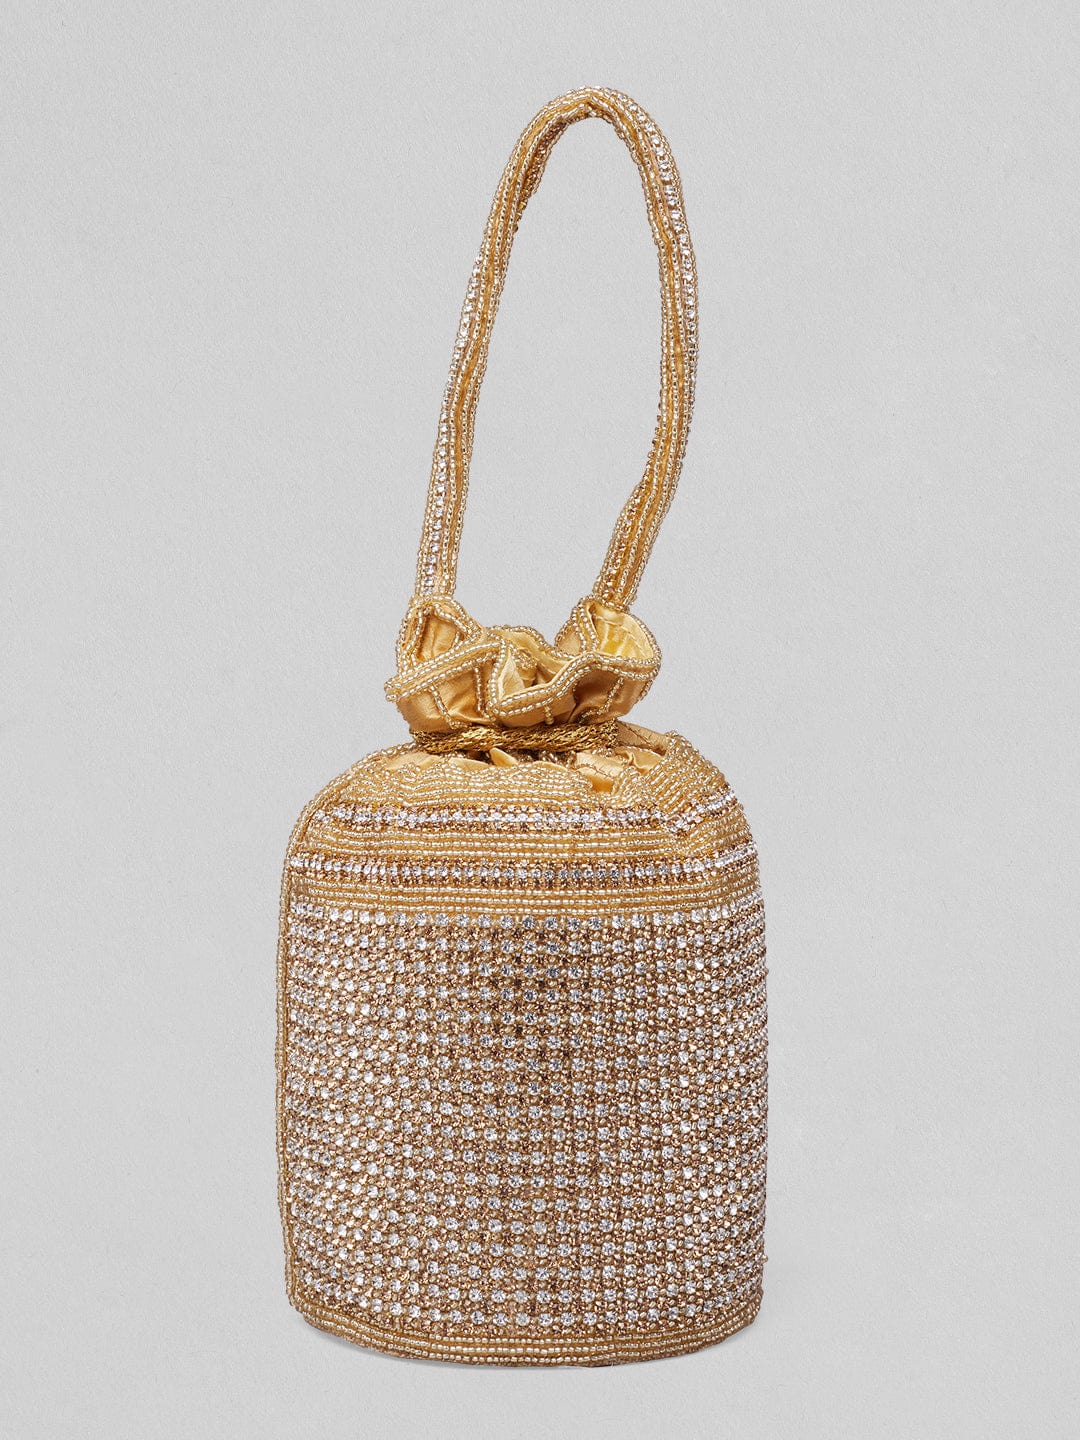 Rubans Gold Coloured Potli Bag With Embroided Design Of Stones. Handbag &amp; Wallet Accessories